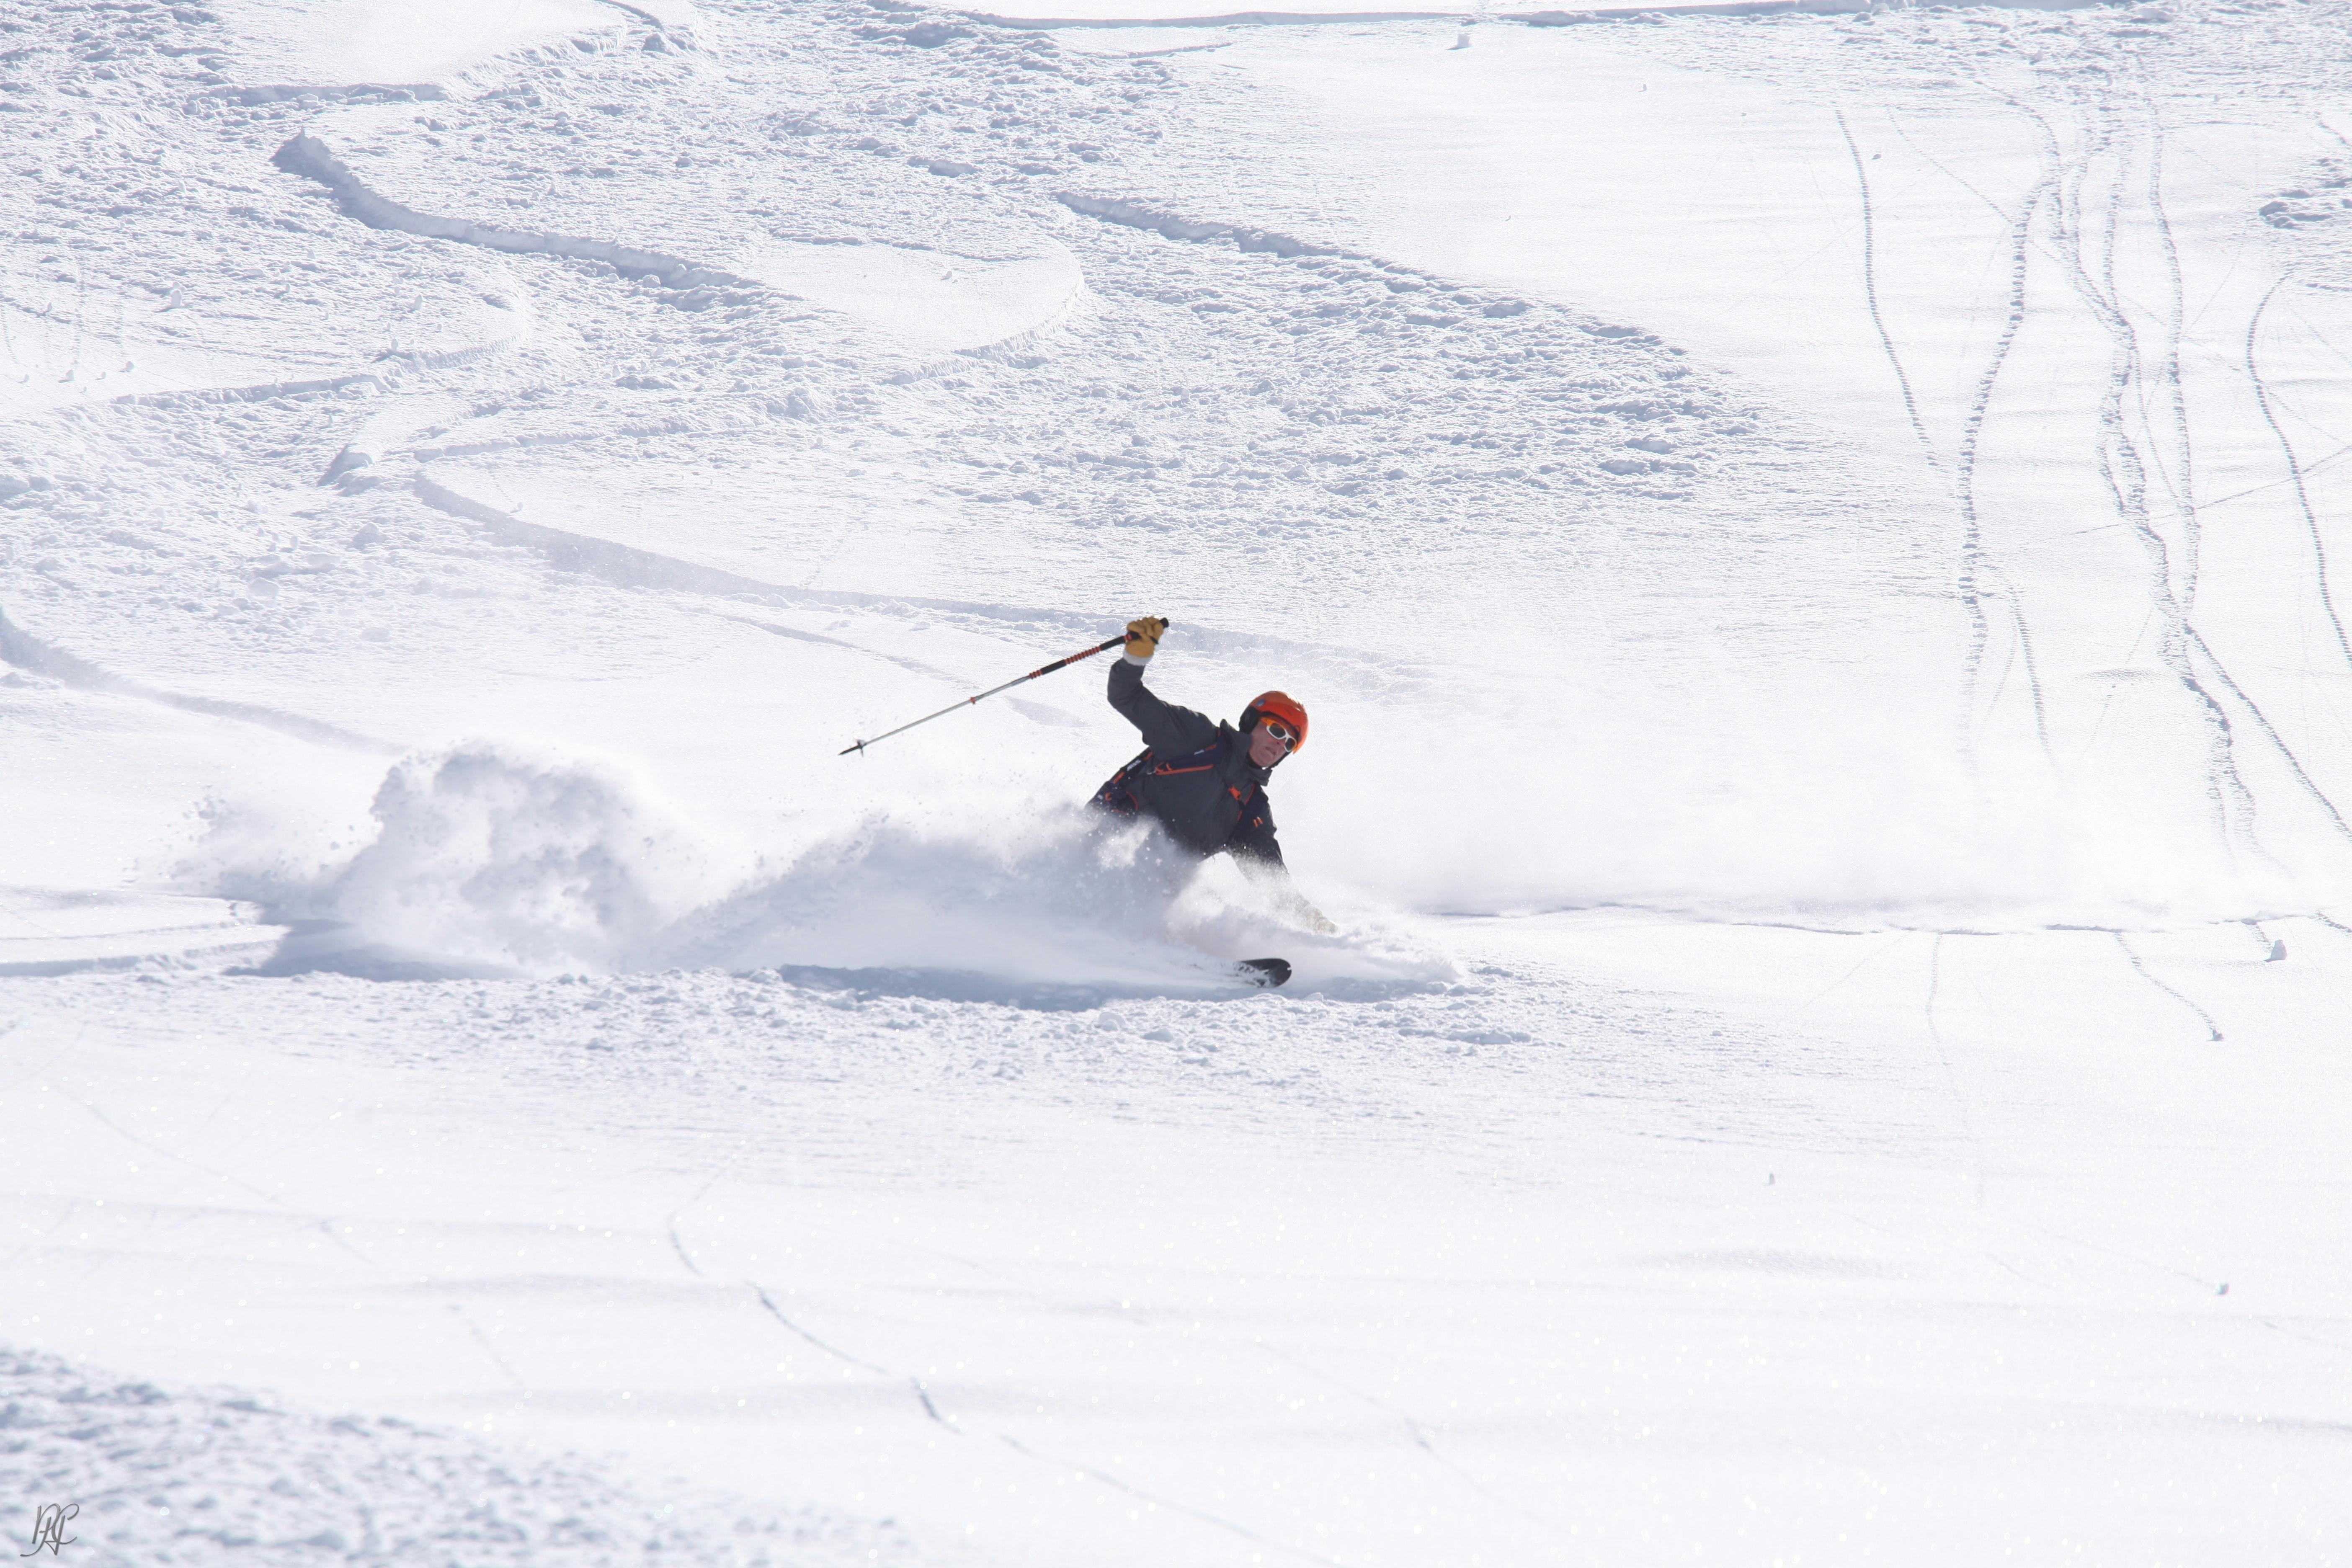 A skier turns in deep snow and kicks up a cloud of powder